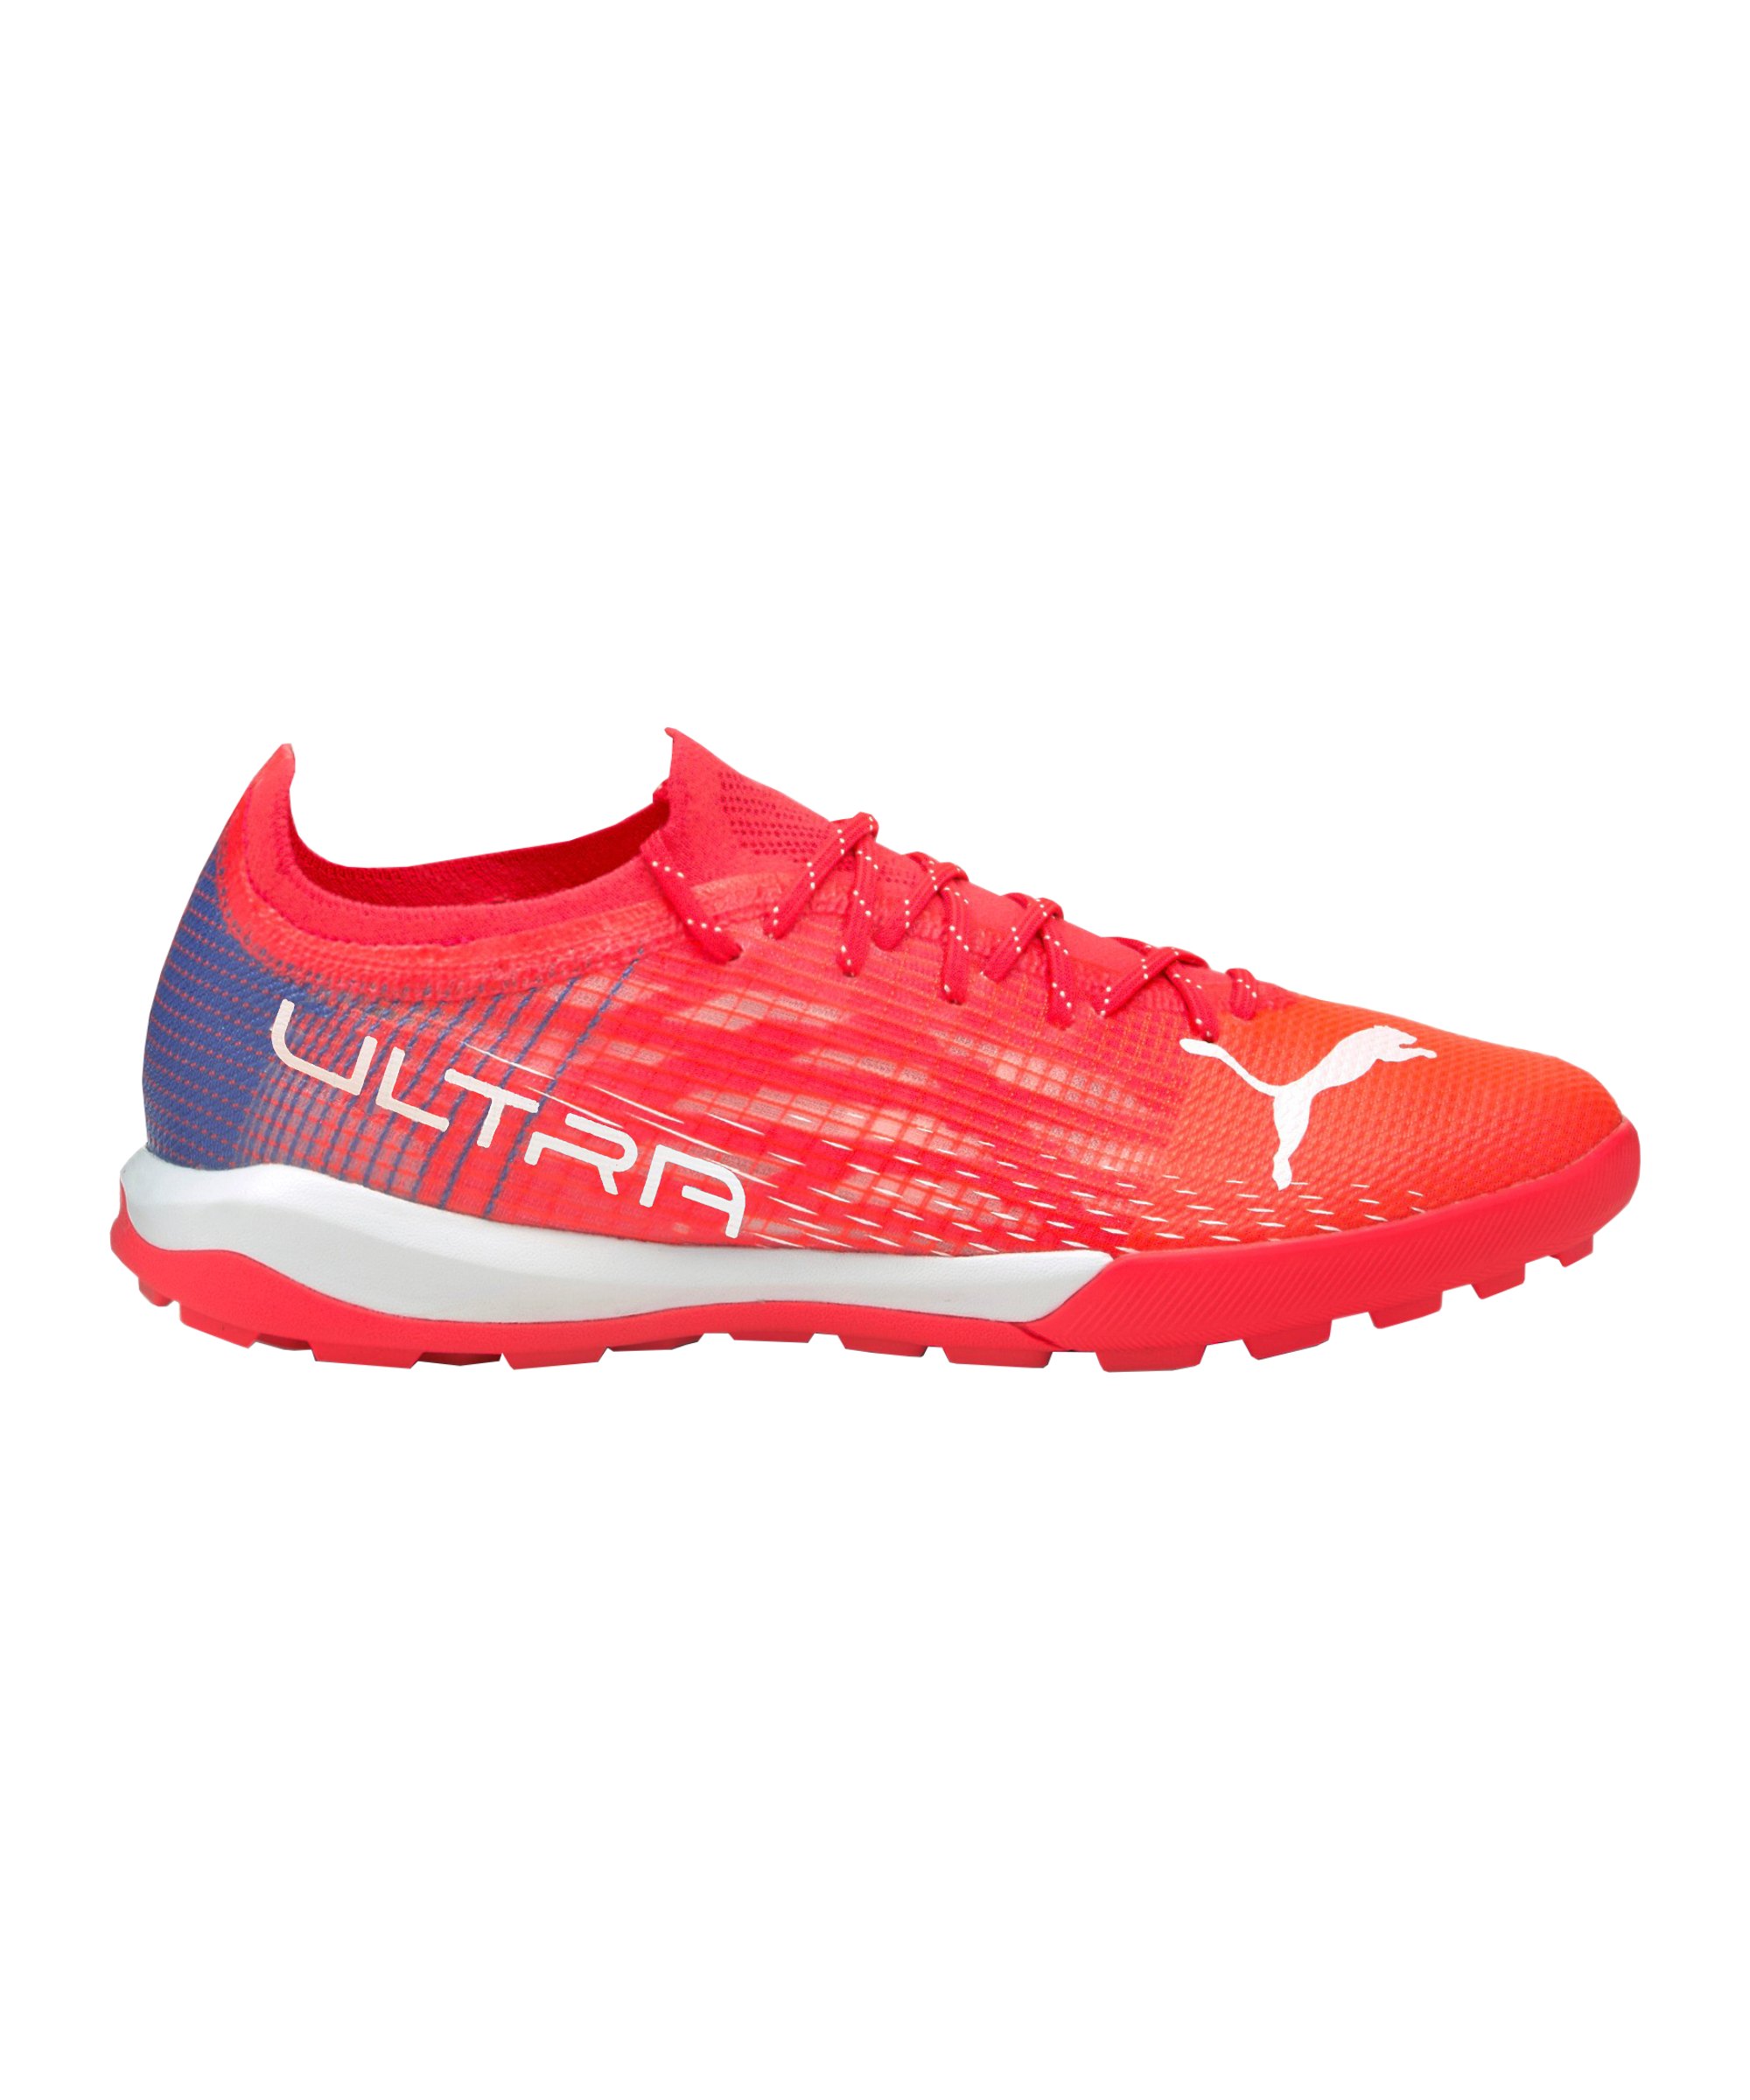 PUMA ULTRA 1.3 Faster Football Pro Cage Rot Türkis Weiss F01 - rot